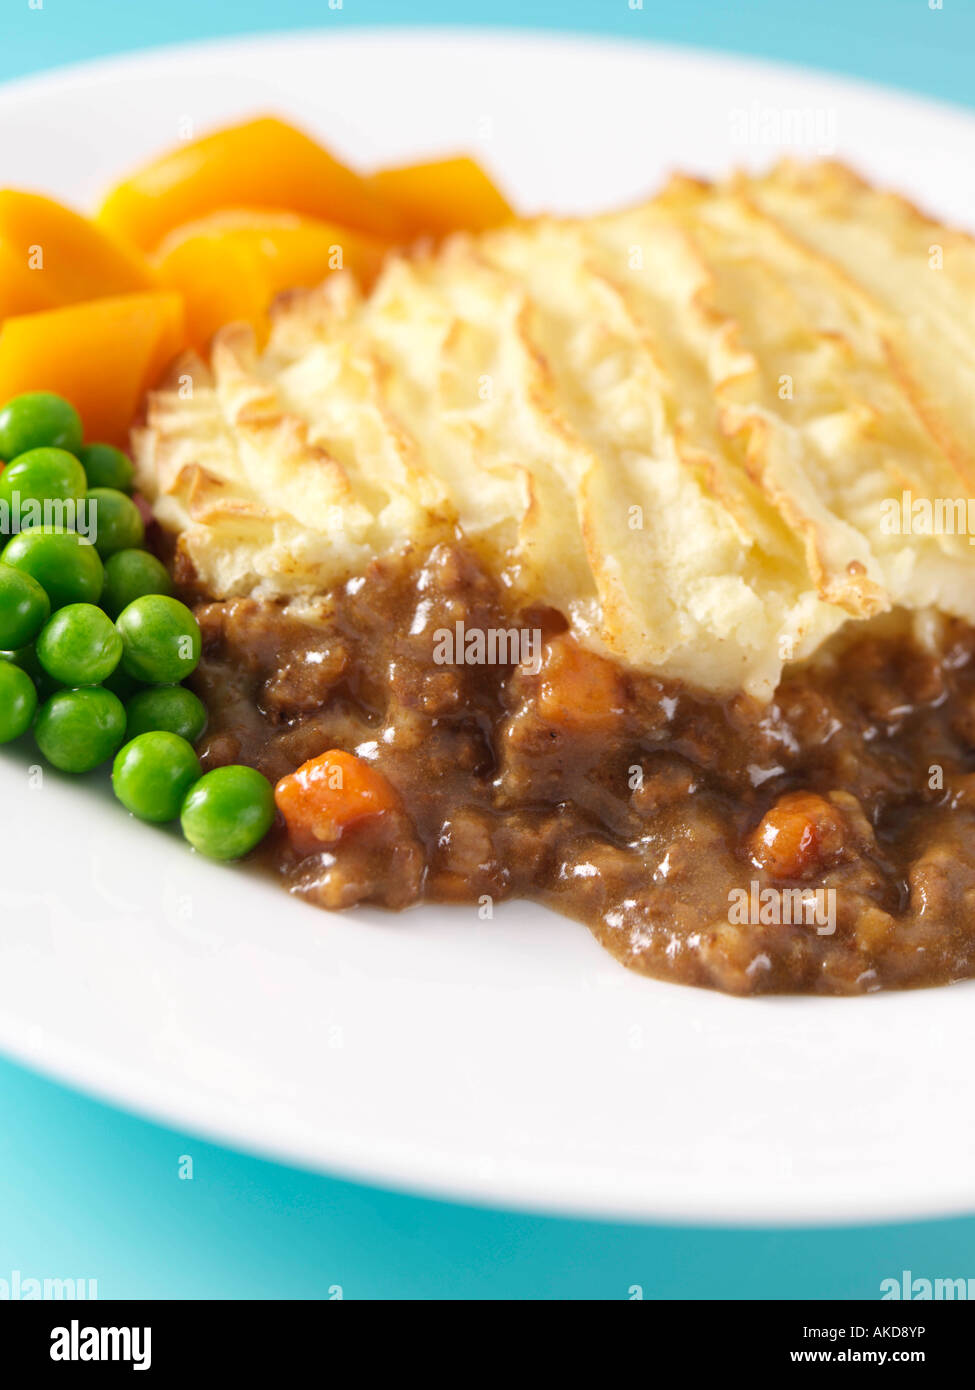 A Plate Of Home Made Traditional Shepherds Pie Peas And Carrots